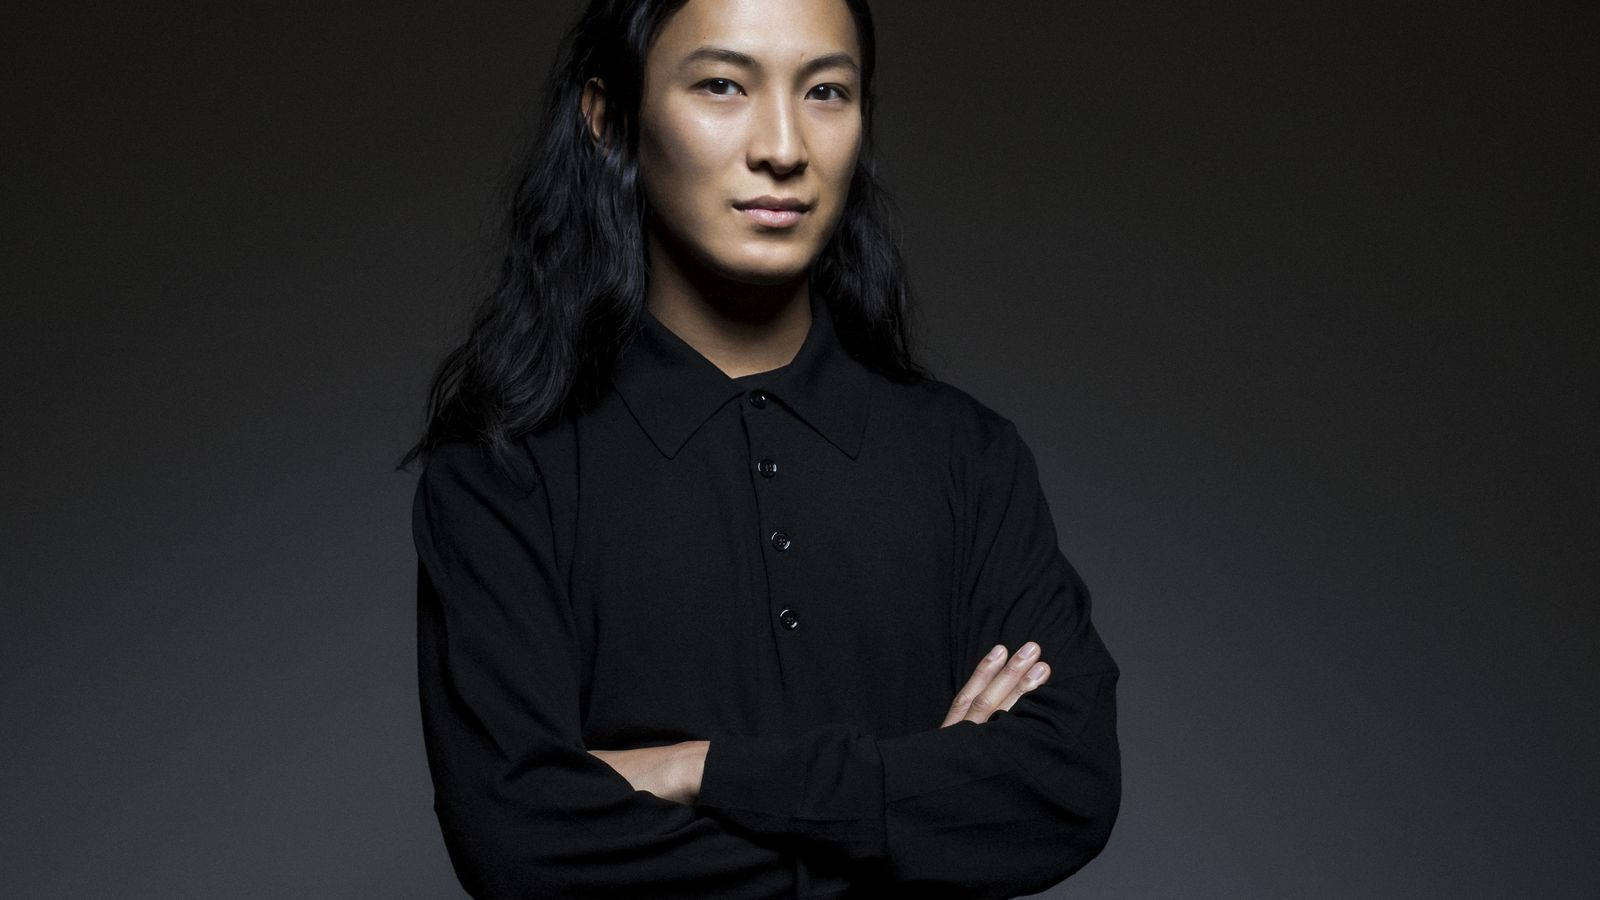 Fashion Designer Alexander Wang confidently standing with arms crossed Wallpaper